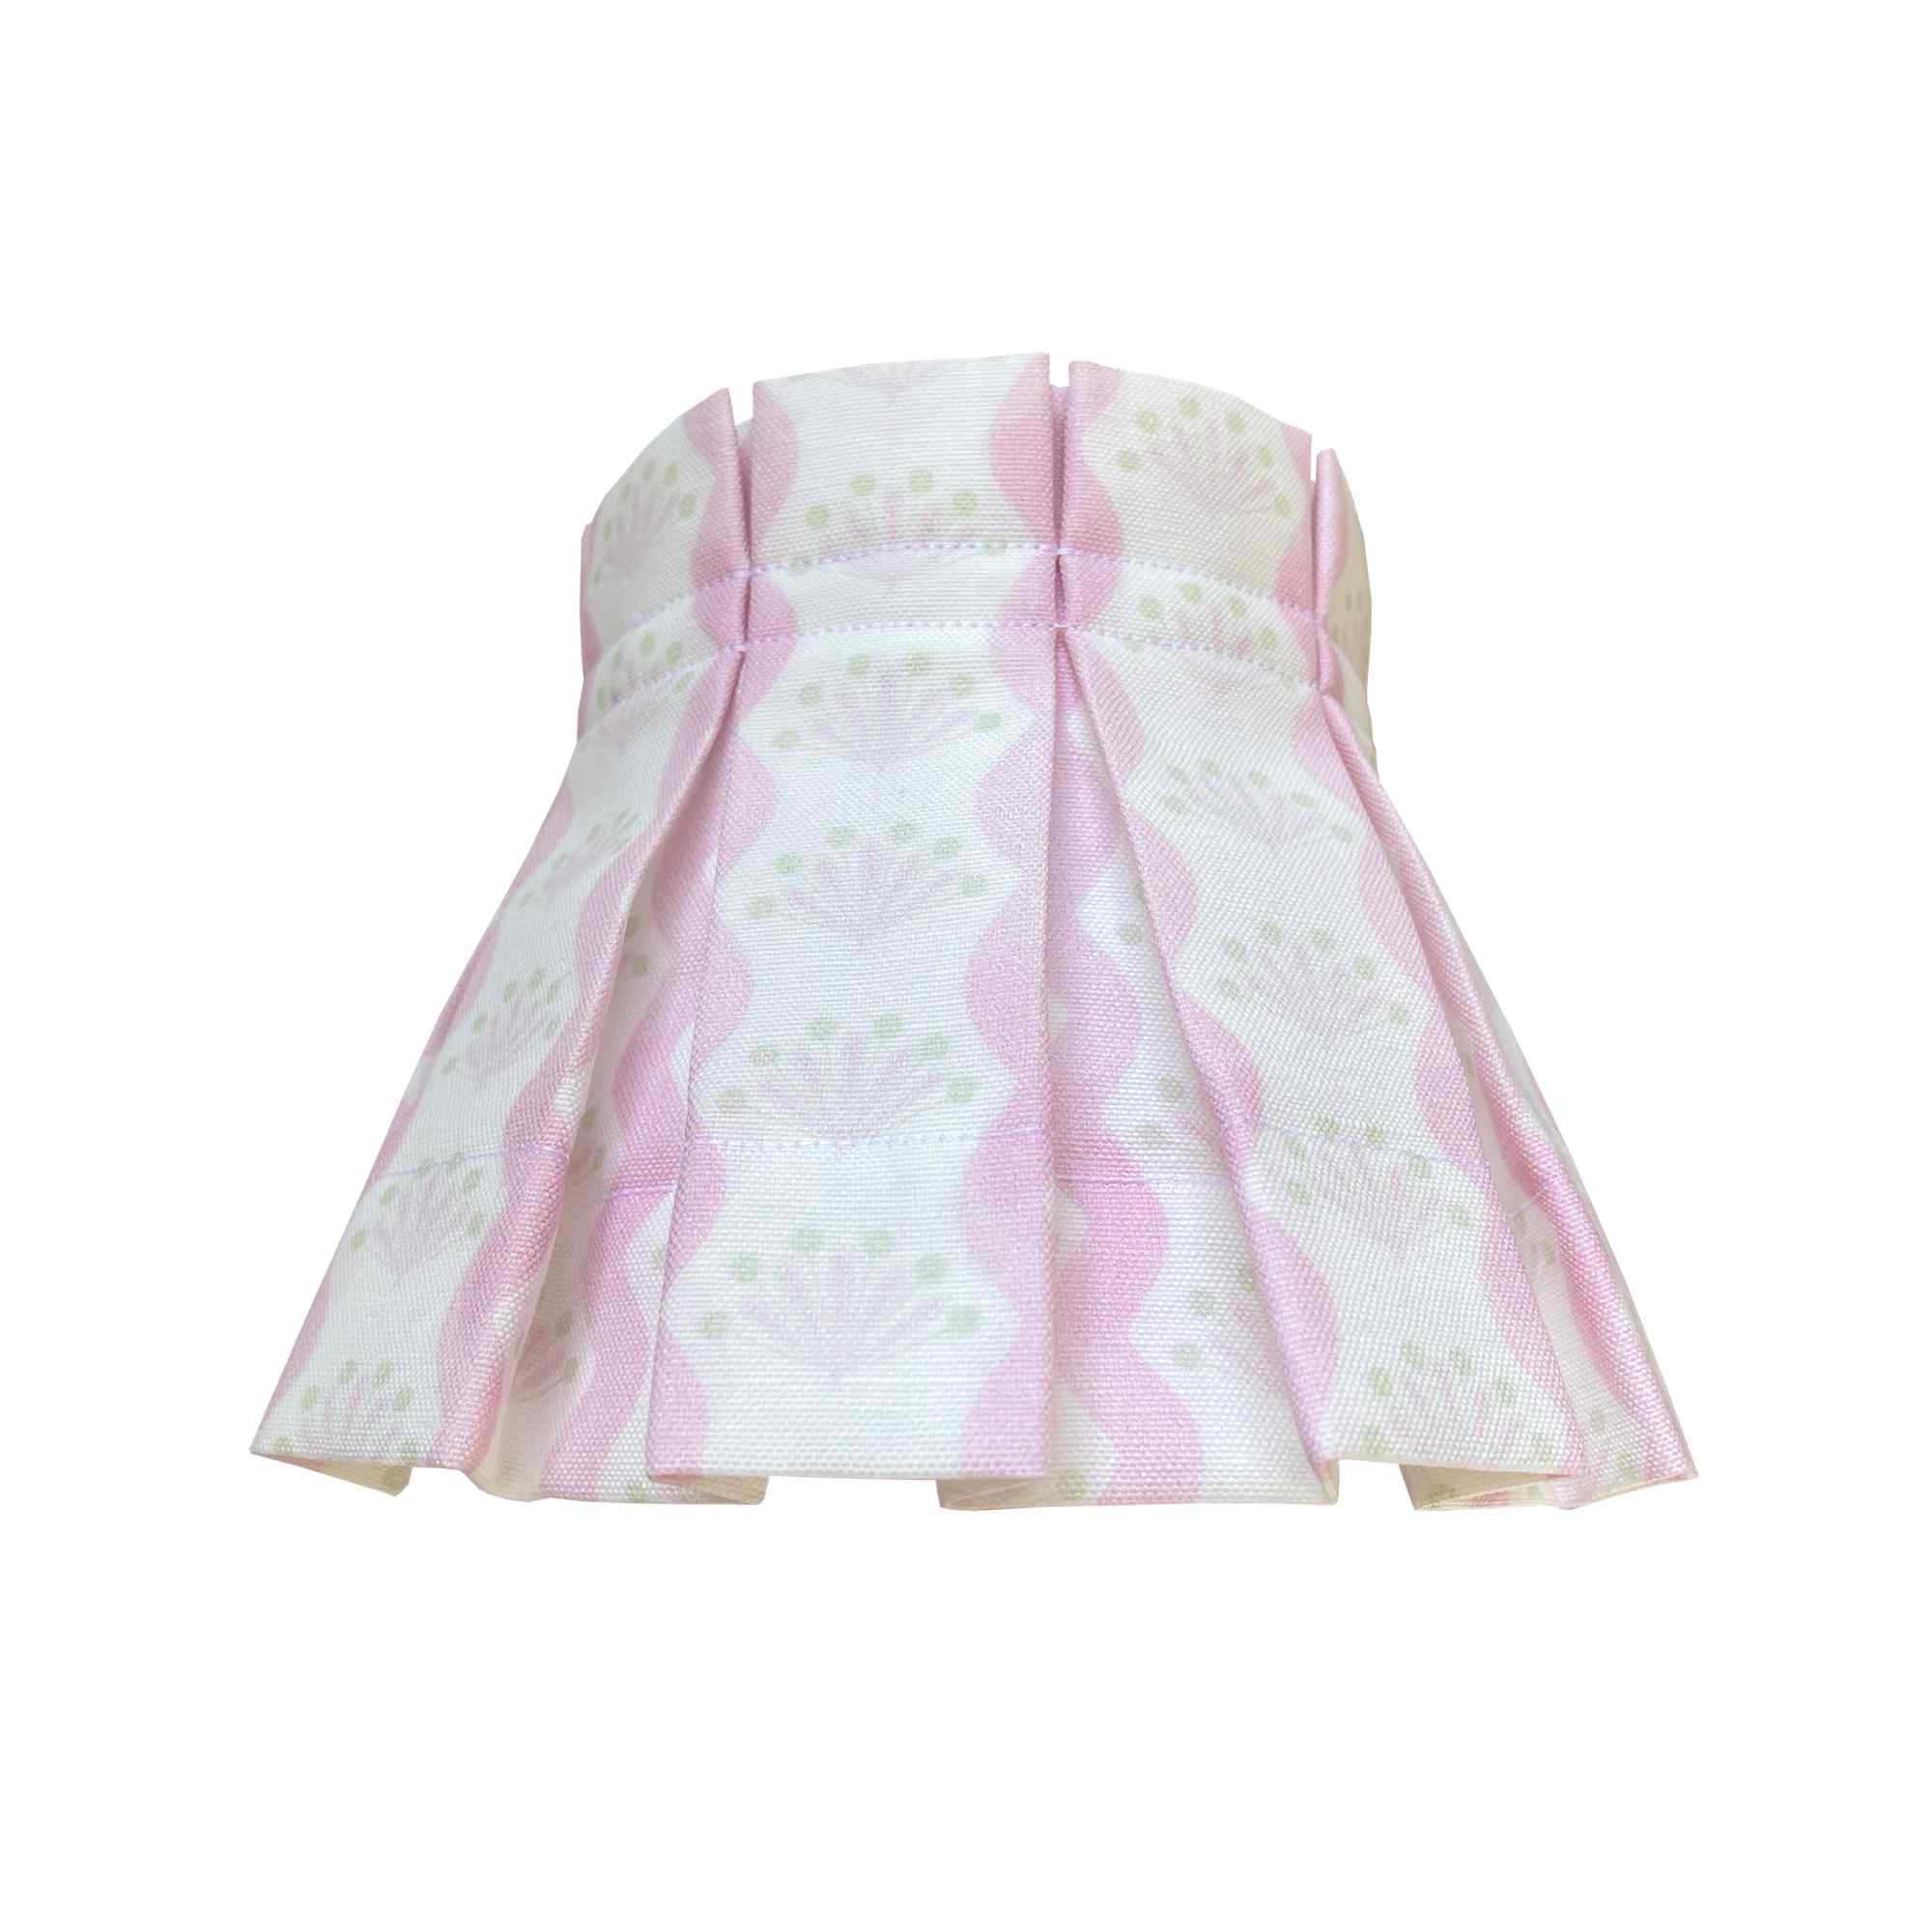 baby pink lampshade in pleat style and floral print is great for girls room.